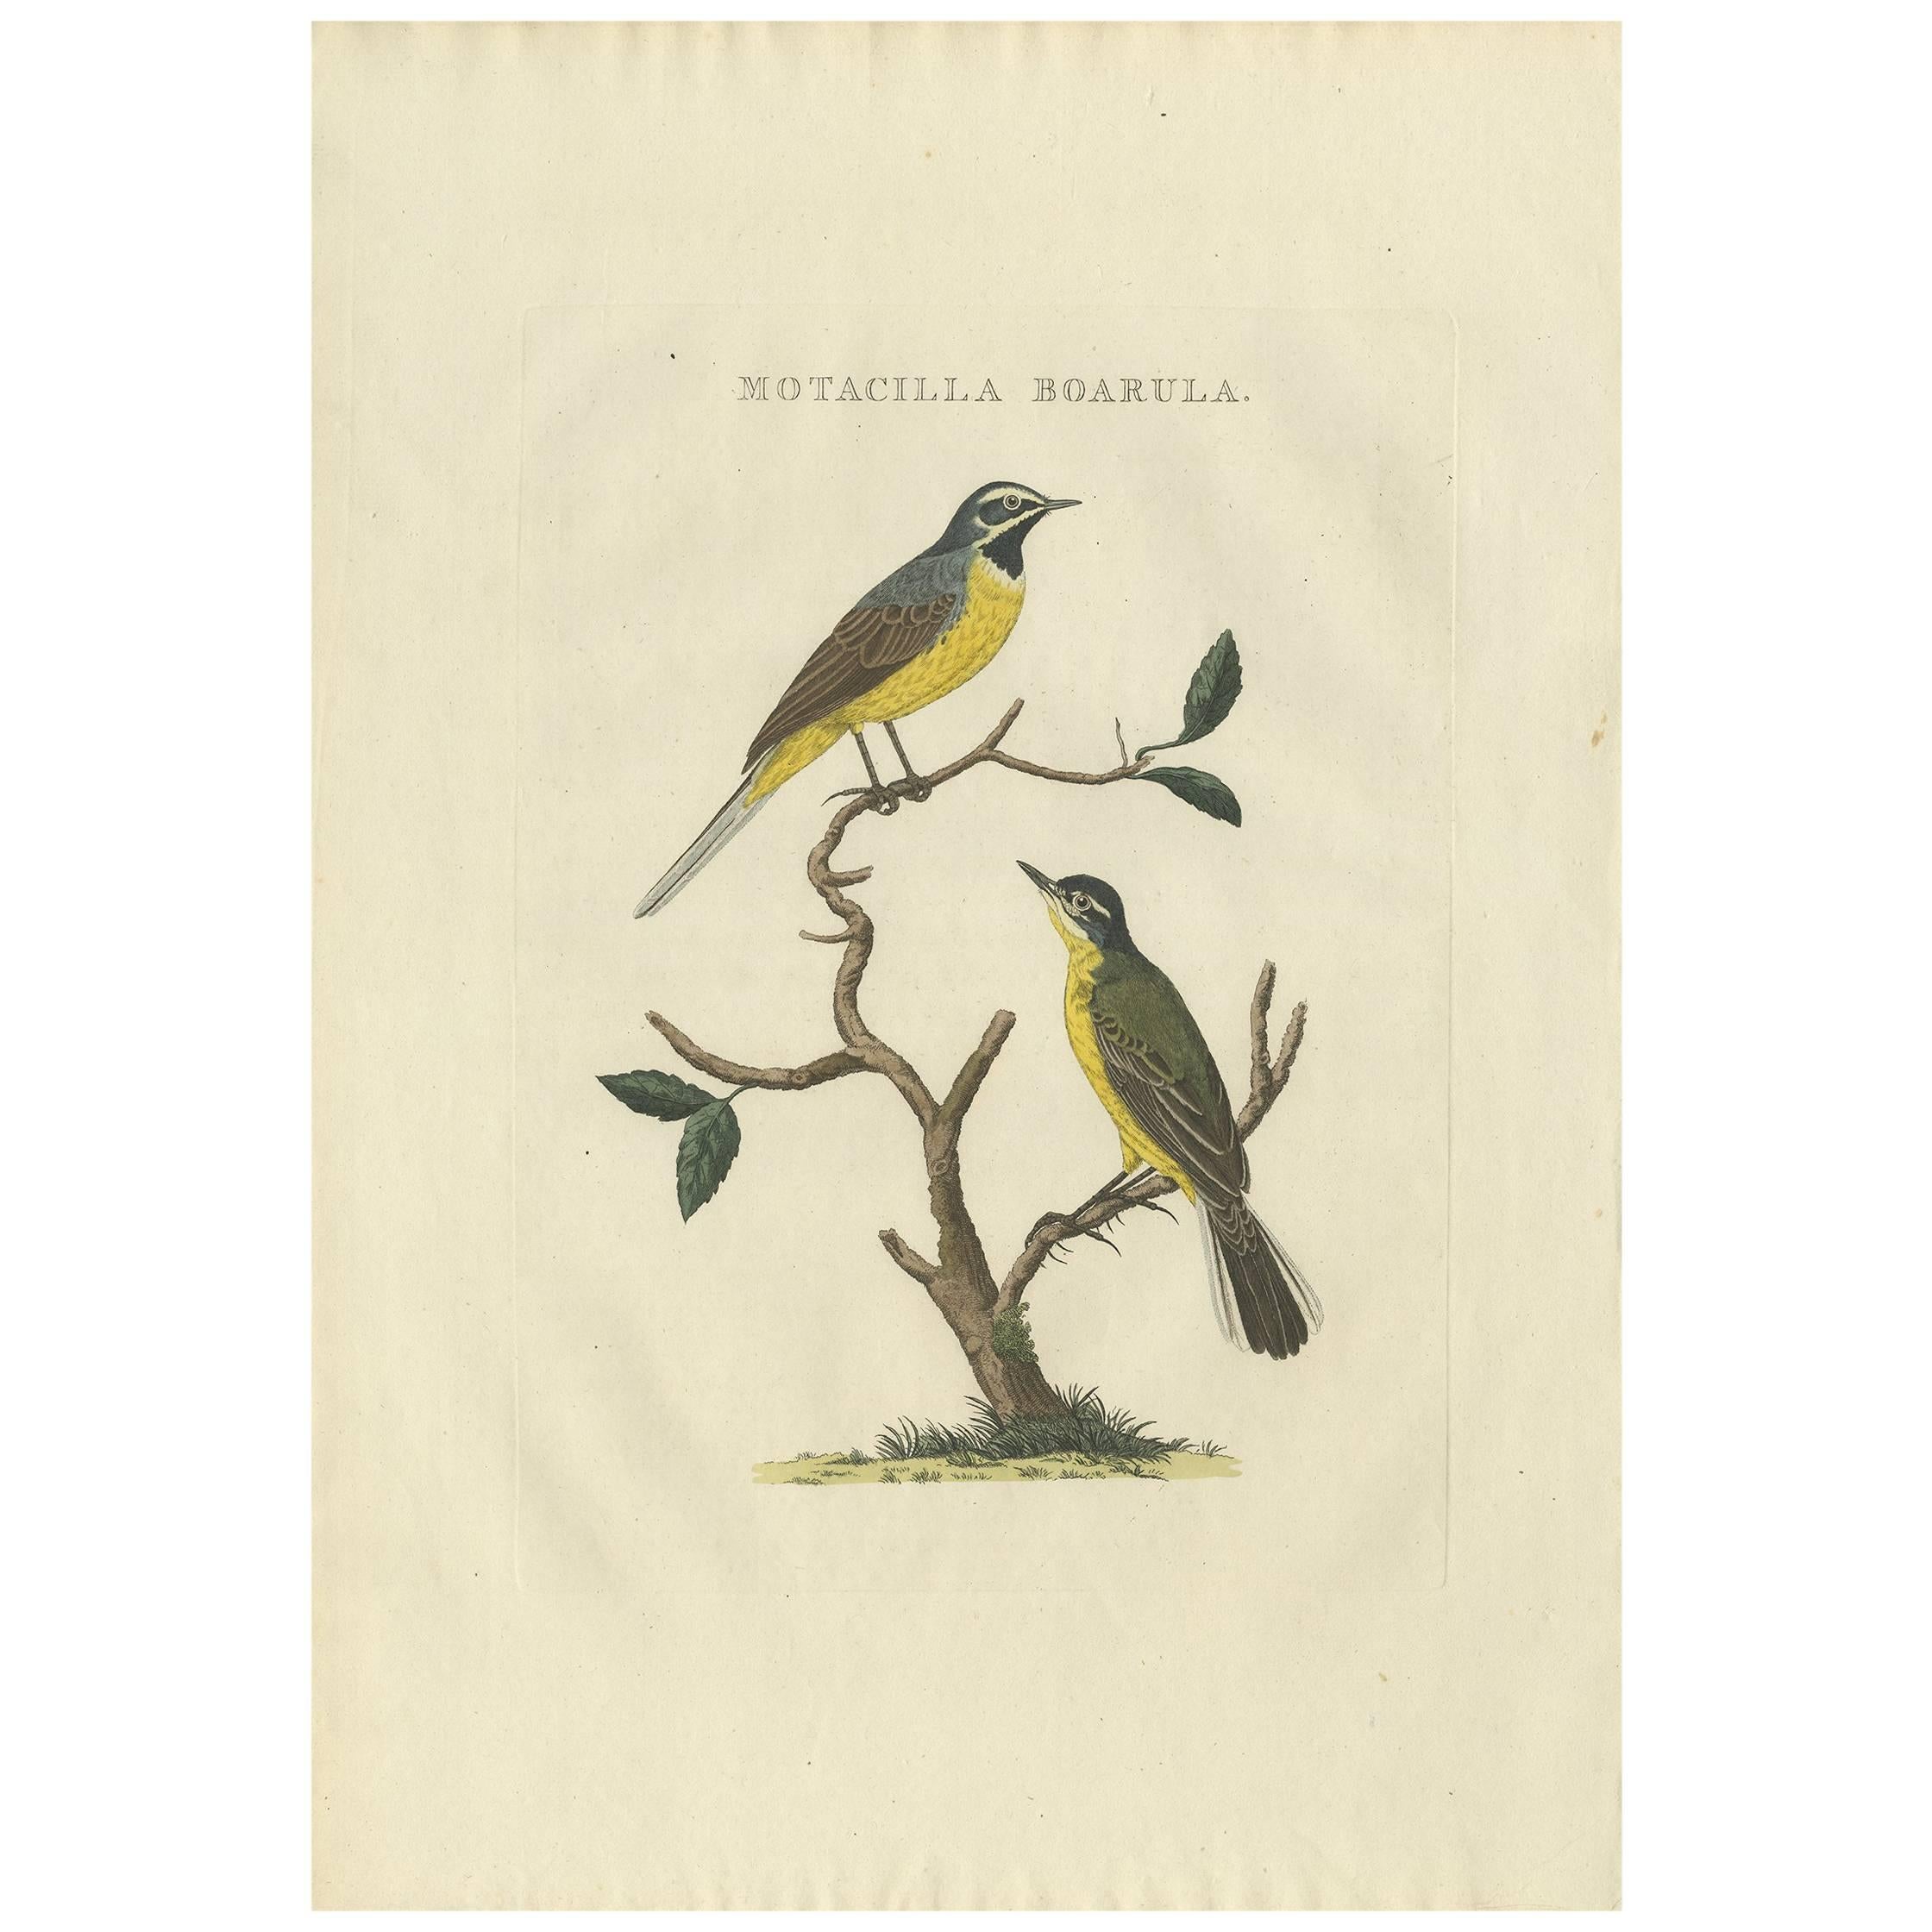 Antique Bird Print of the Yellow Wagtail by Sepp & Nozeman, 1829